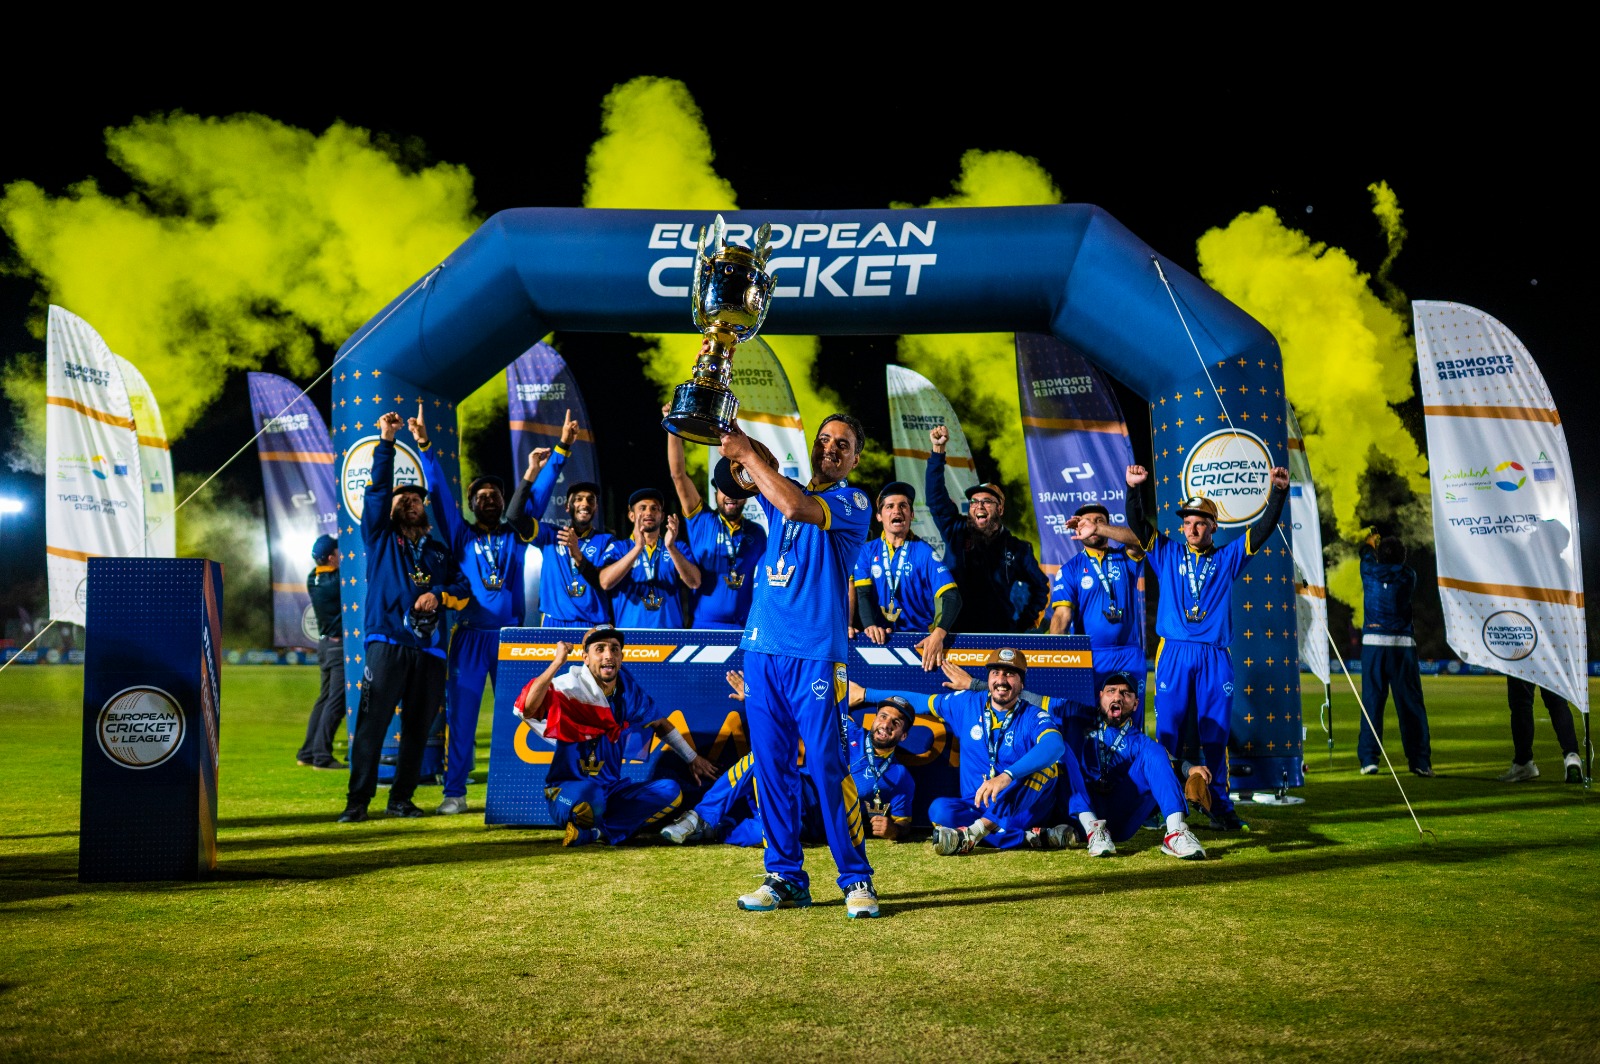 Complete Coverage of the European Cricket League